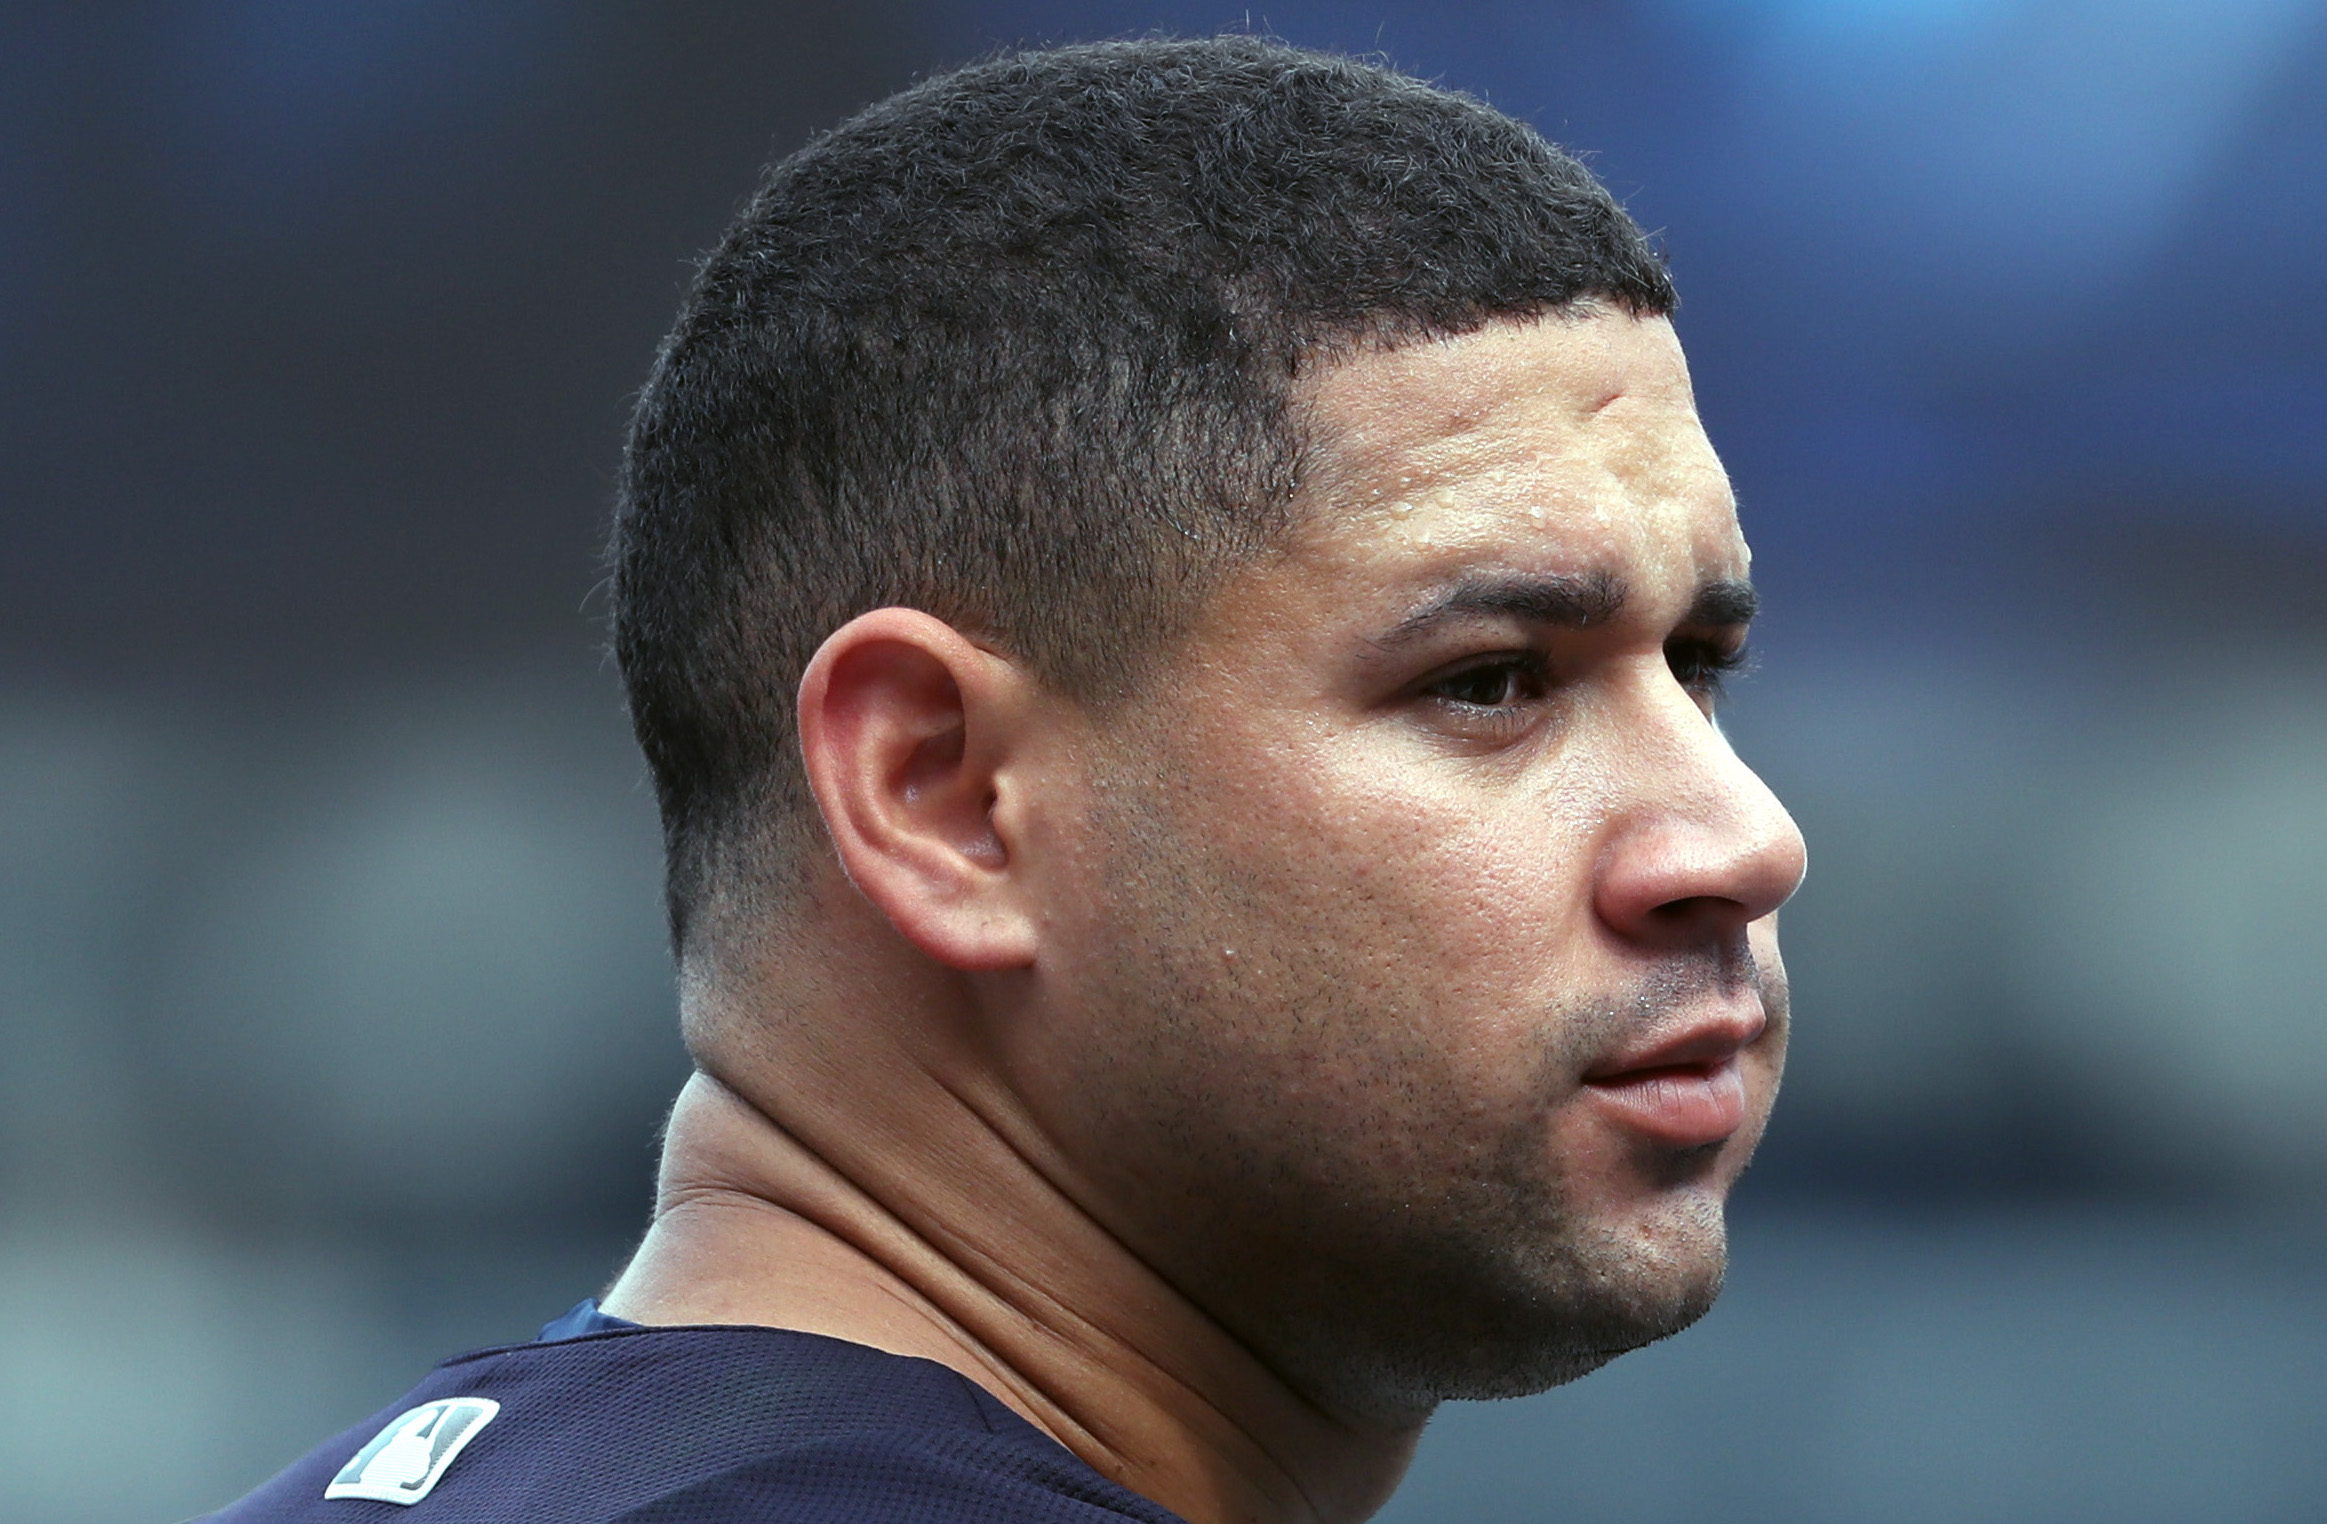 Yankees must bench Gary Sanchez as message to spiraling club